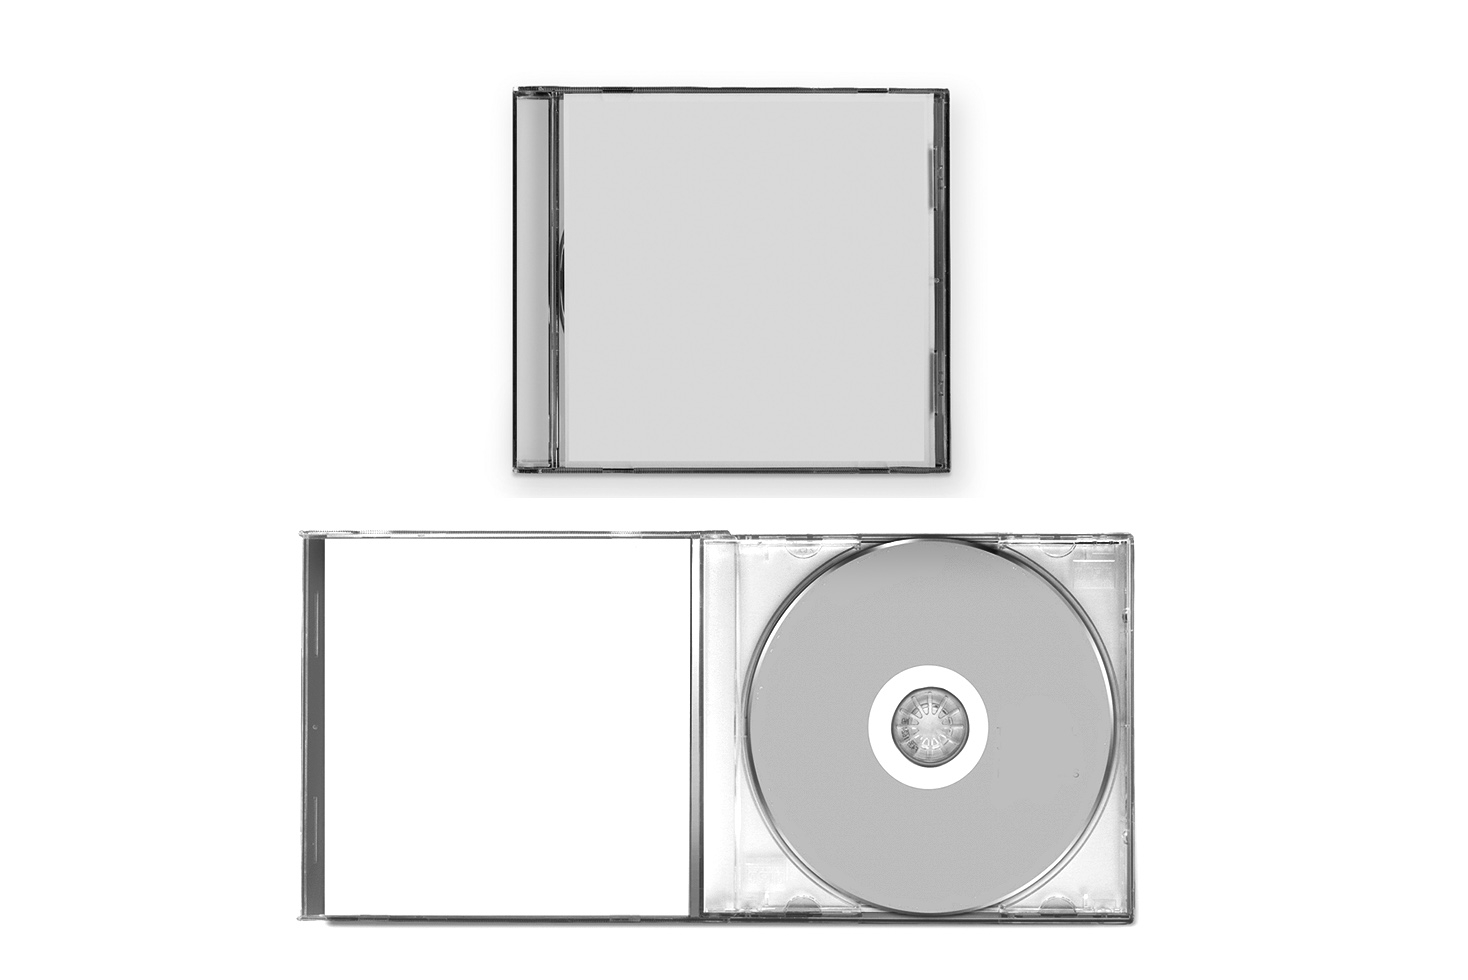 Print a simple jewel case cd package at home - Music-Artwork